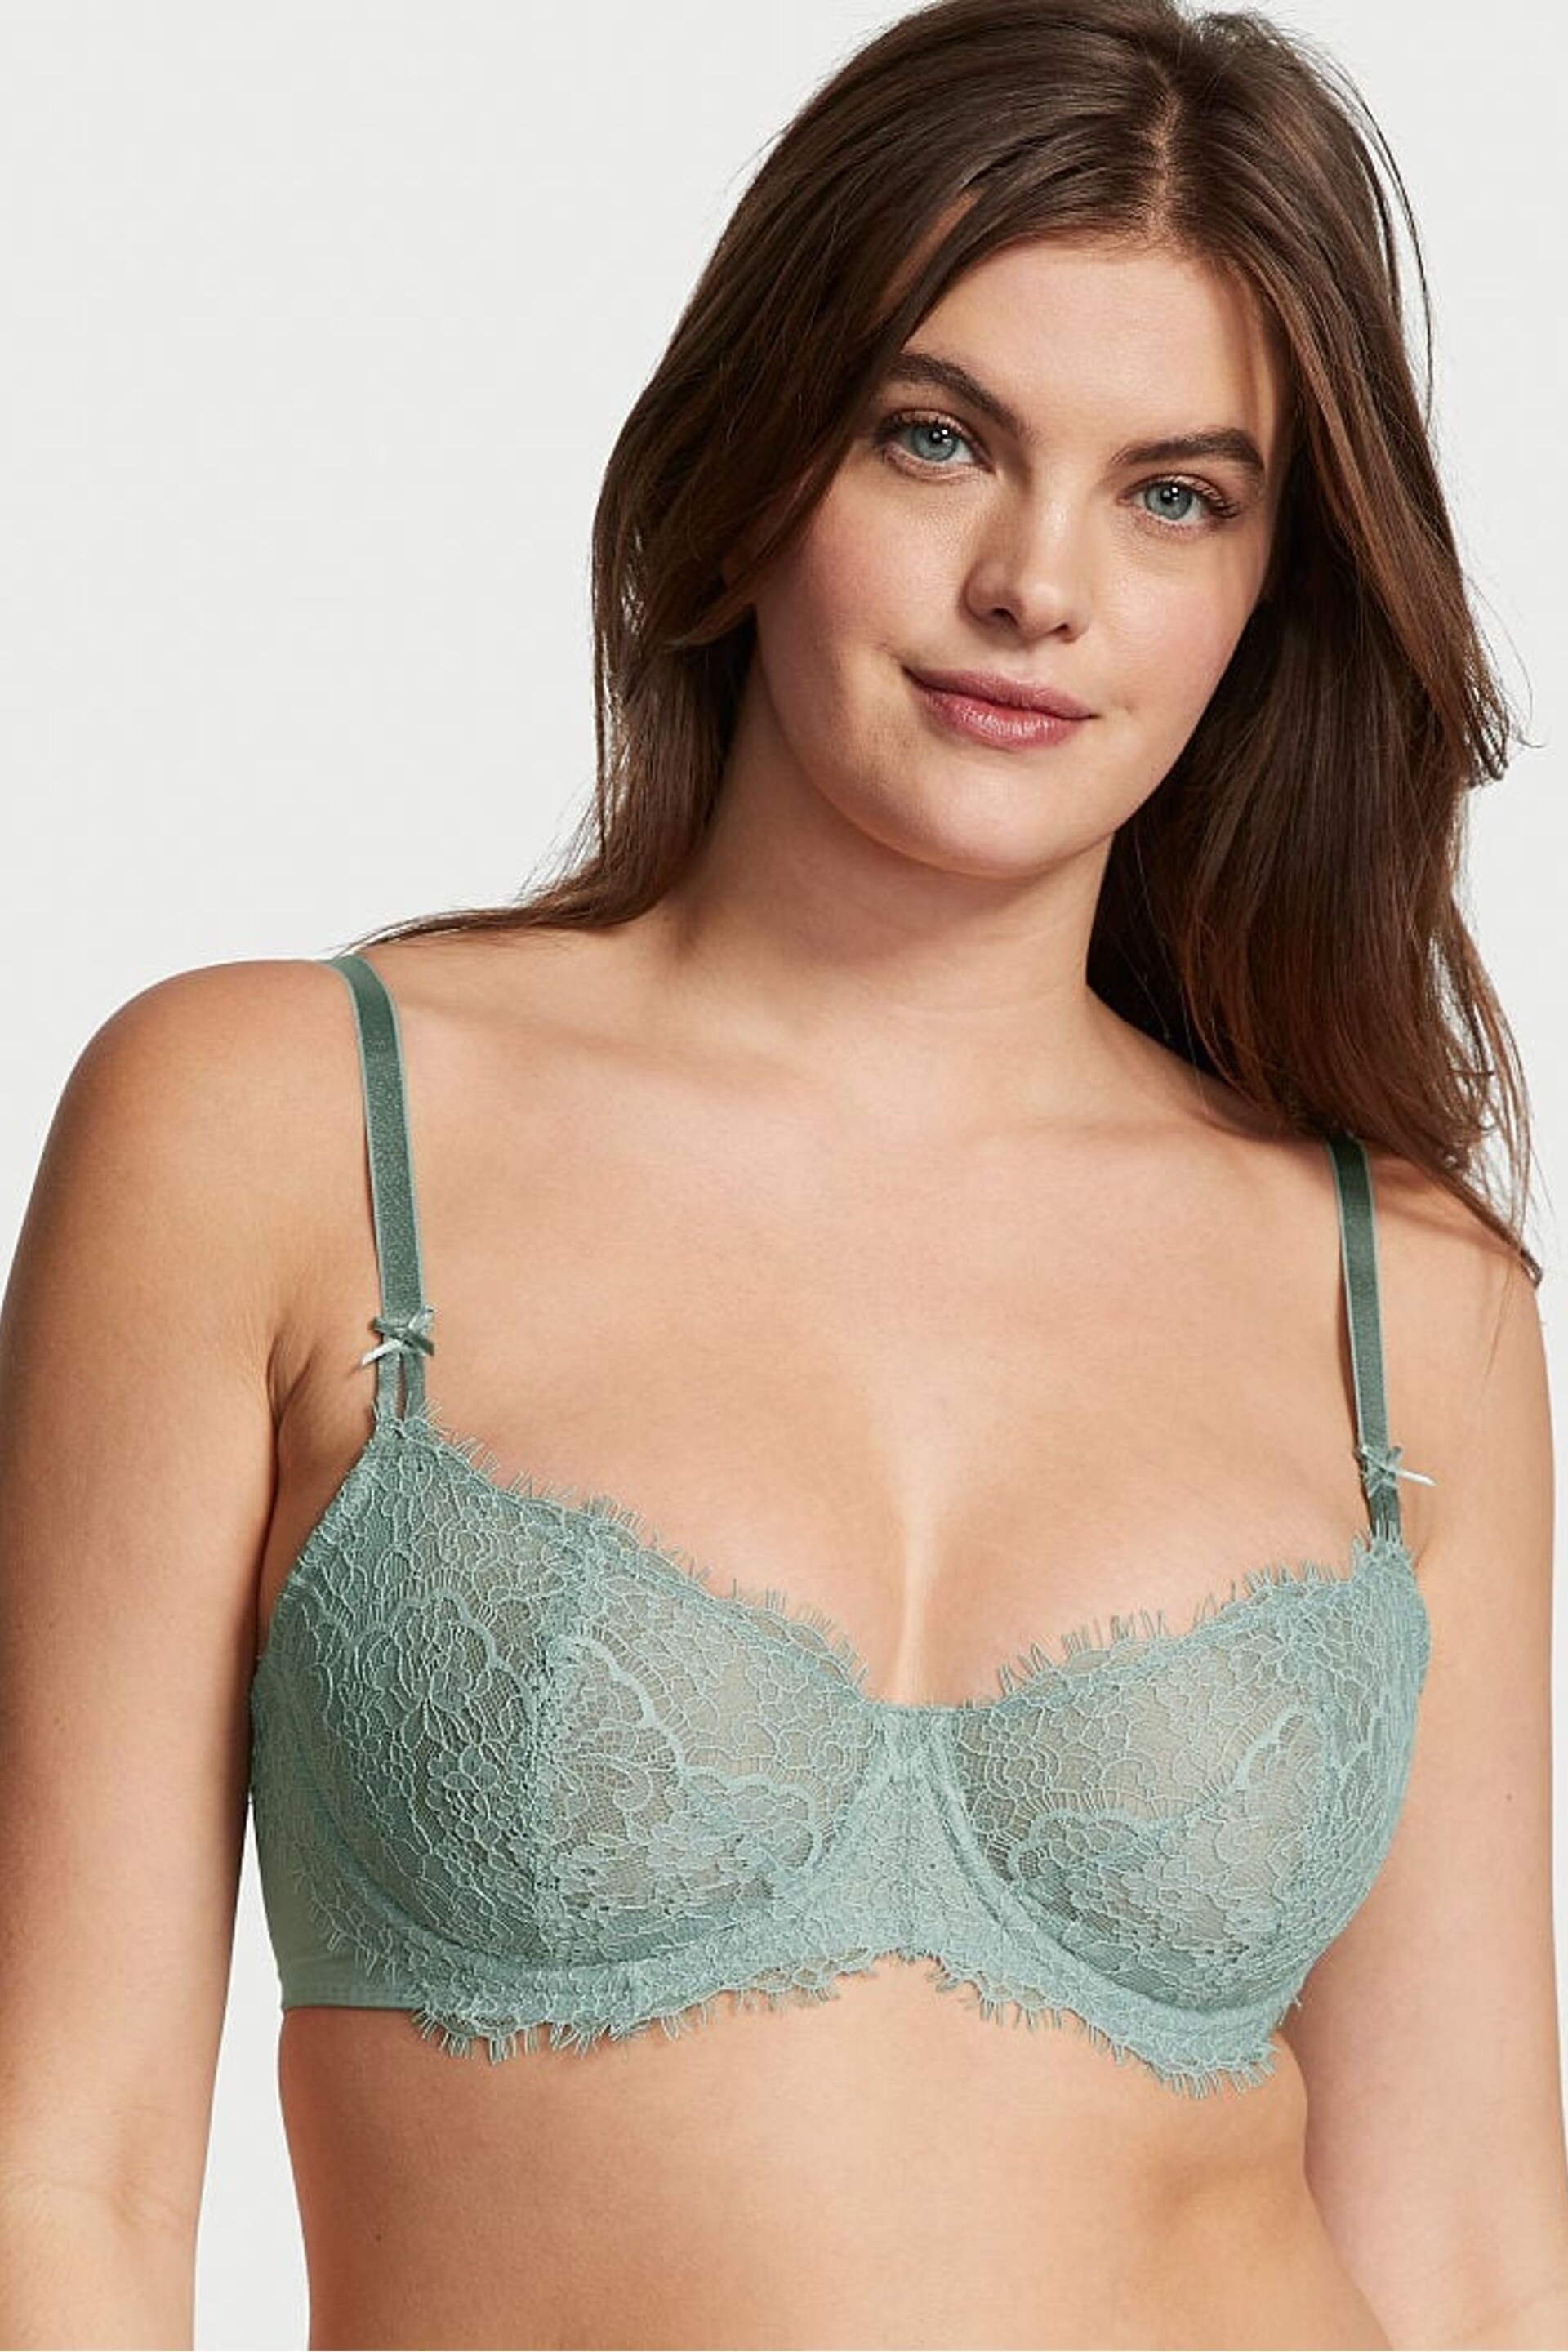 Victoria's Secret Sage Dust Green Unlined Balcony Lightly Lined Lace Demi Bra - Image 1 of 3